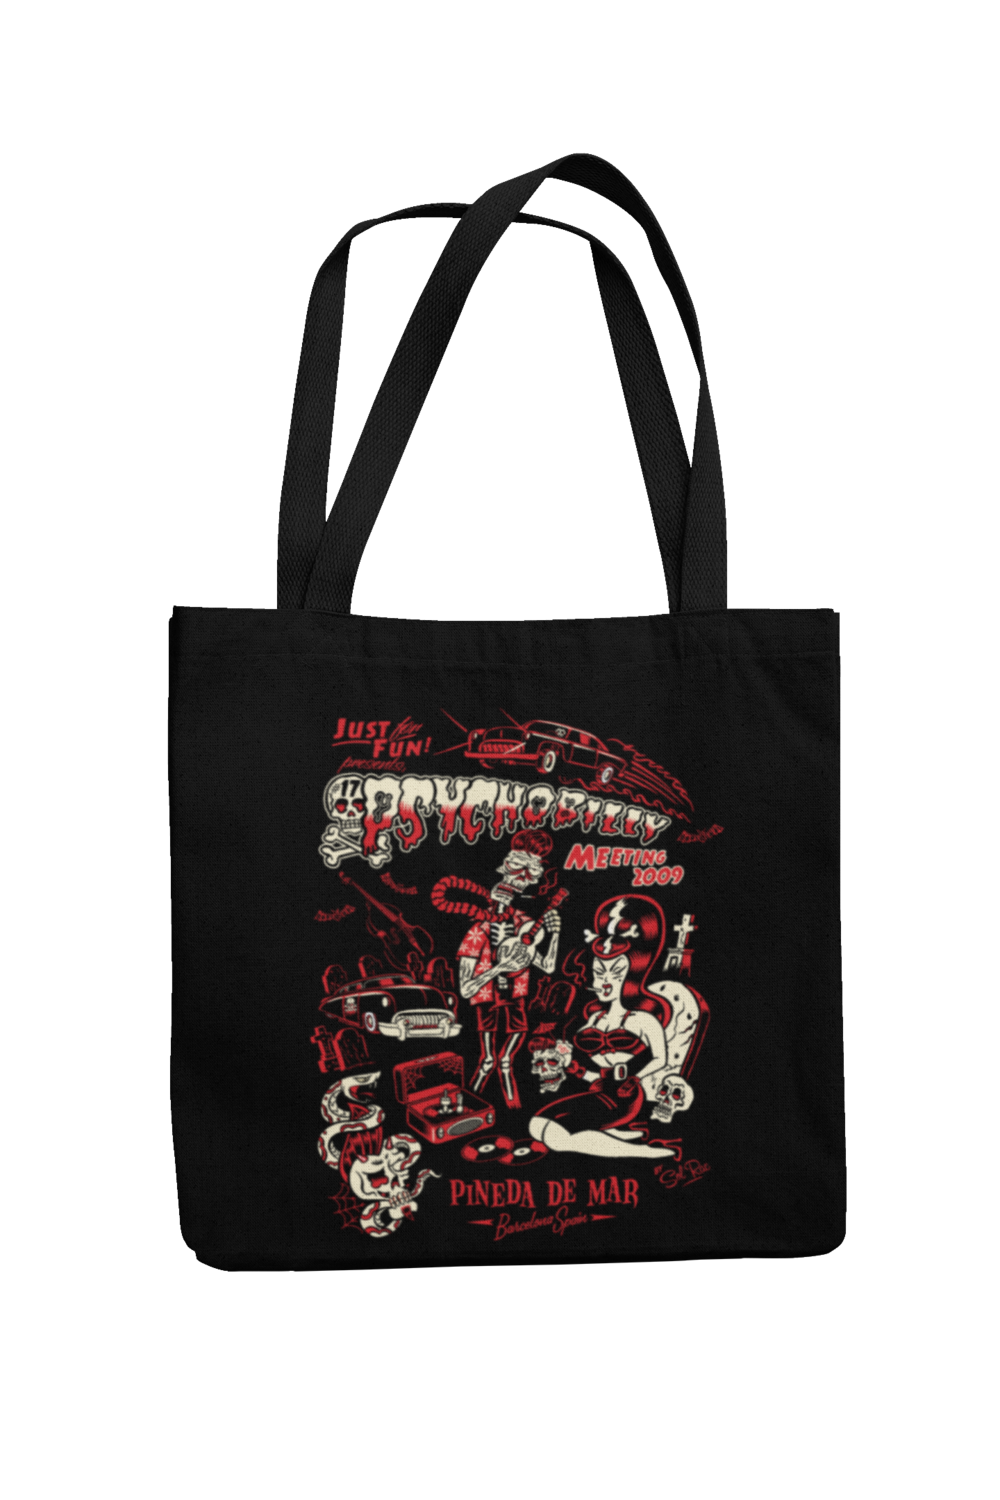 Cotton Bag Psychobilly meeting design by Solrac 2009